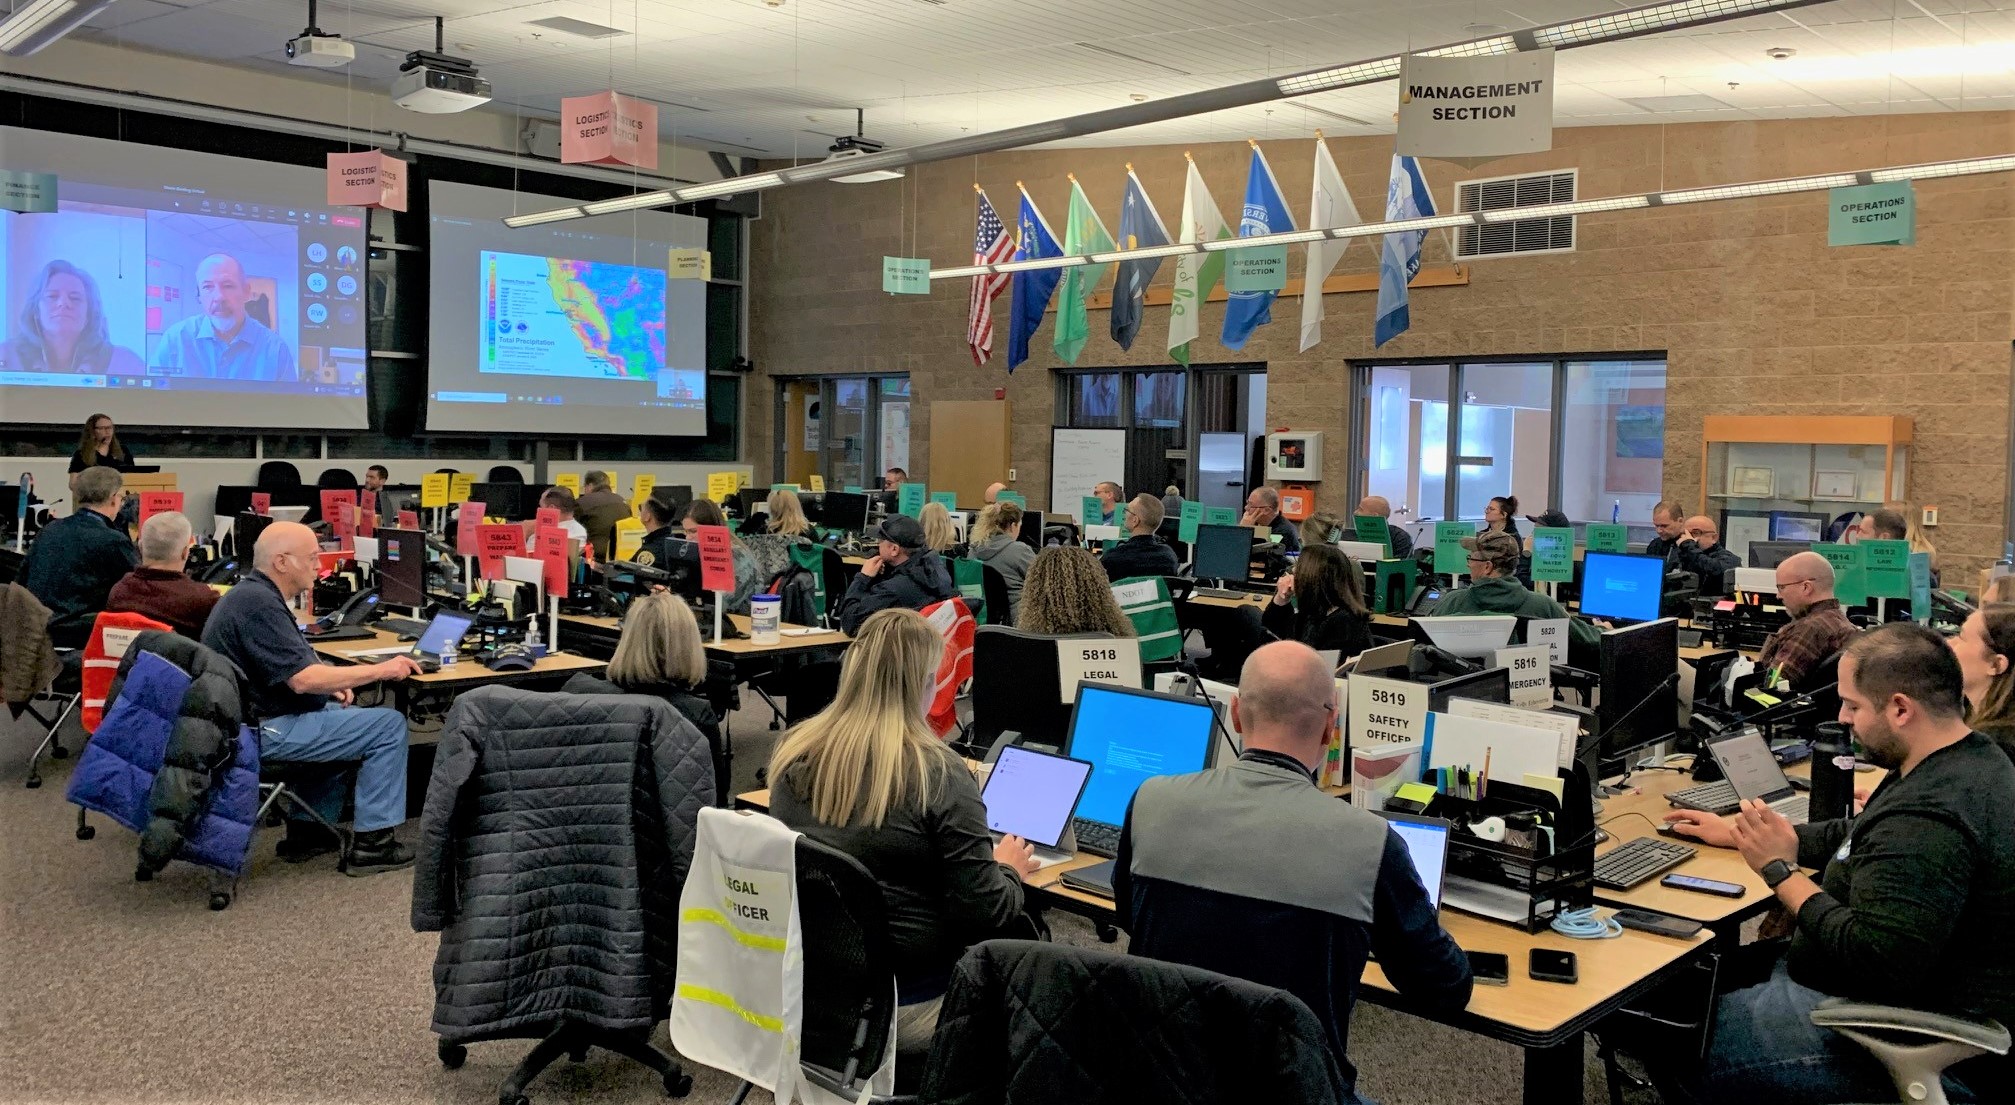 Staff from local governments and emergency response gather at the Regional Emergency Operations Center to coordinate efforts ahead of the next storm.